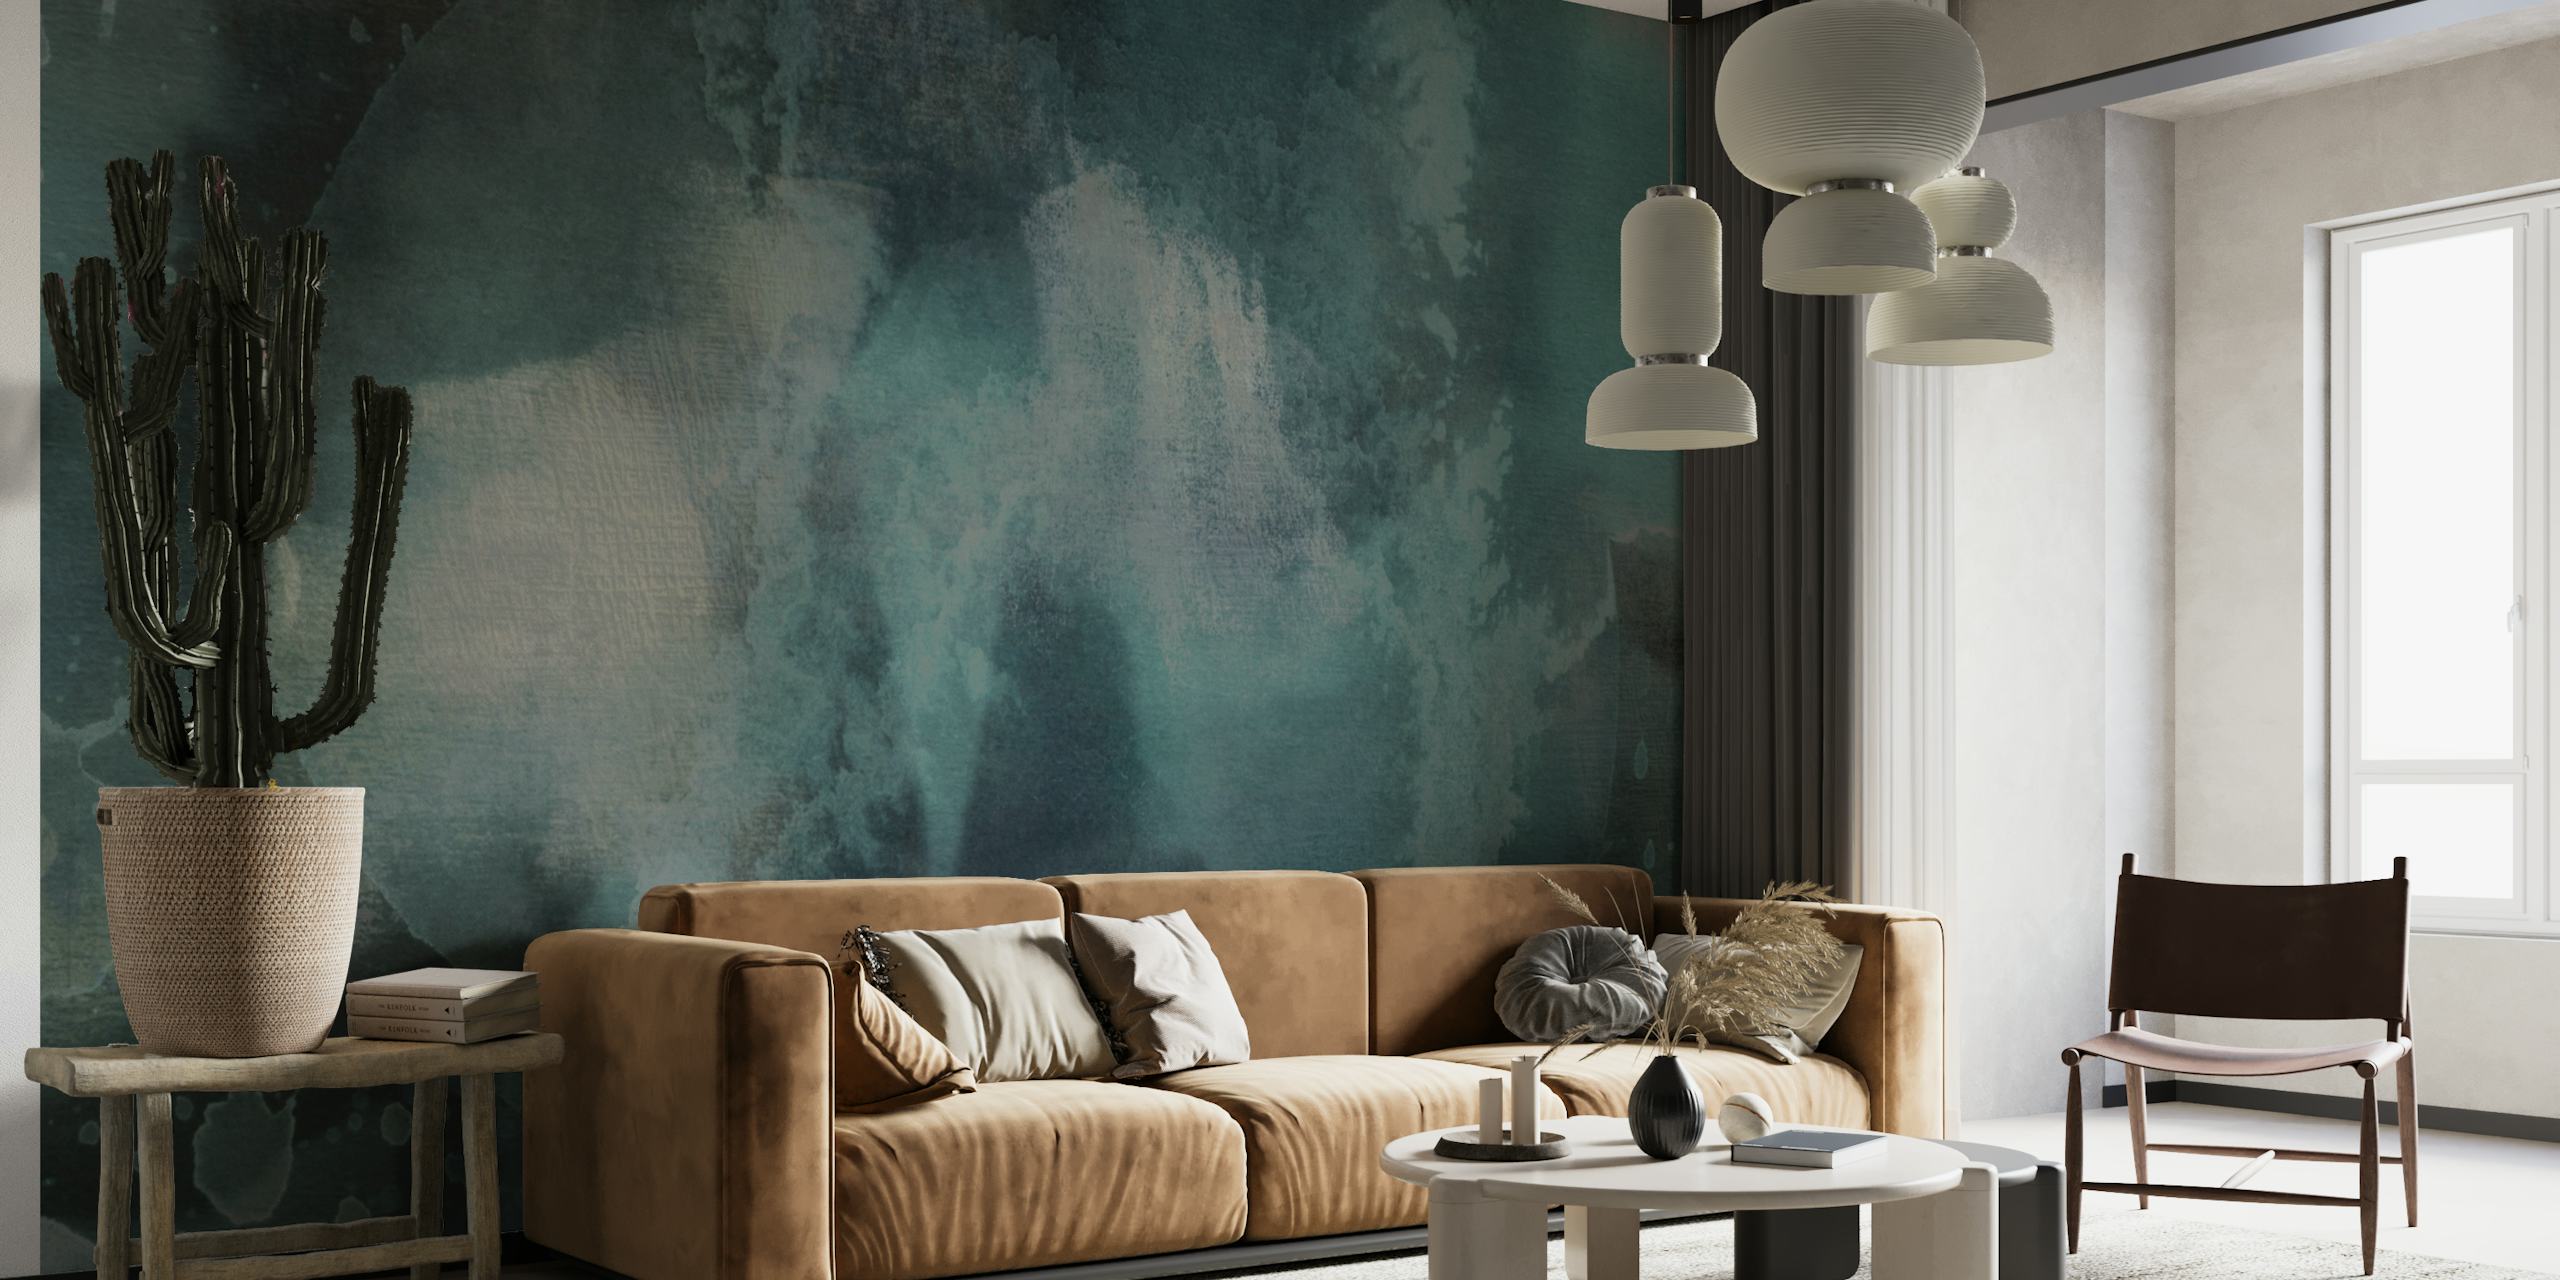 Abstract teal and grey wall mural creating a tranquil waterscape impression